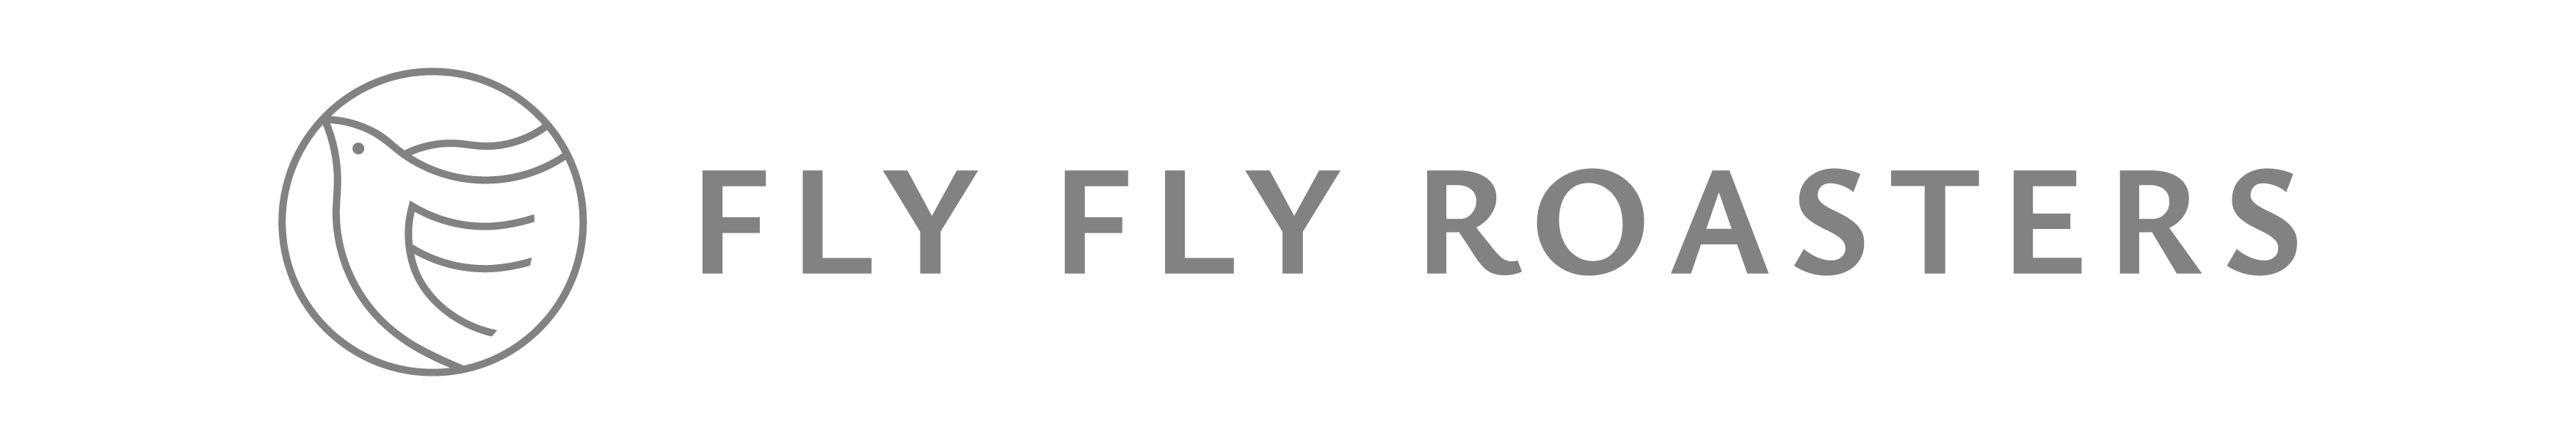 FLY FLY ROASTERS